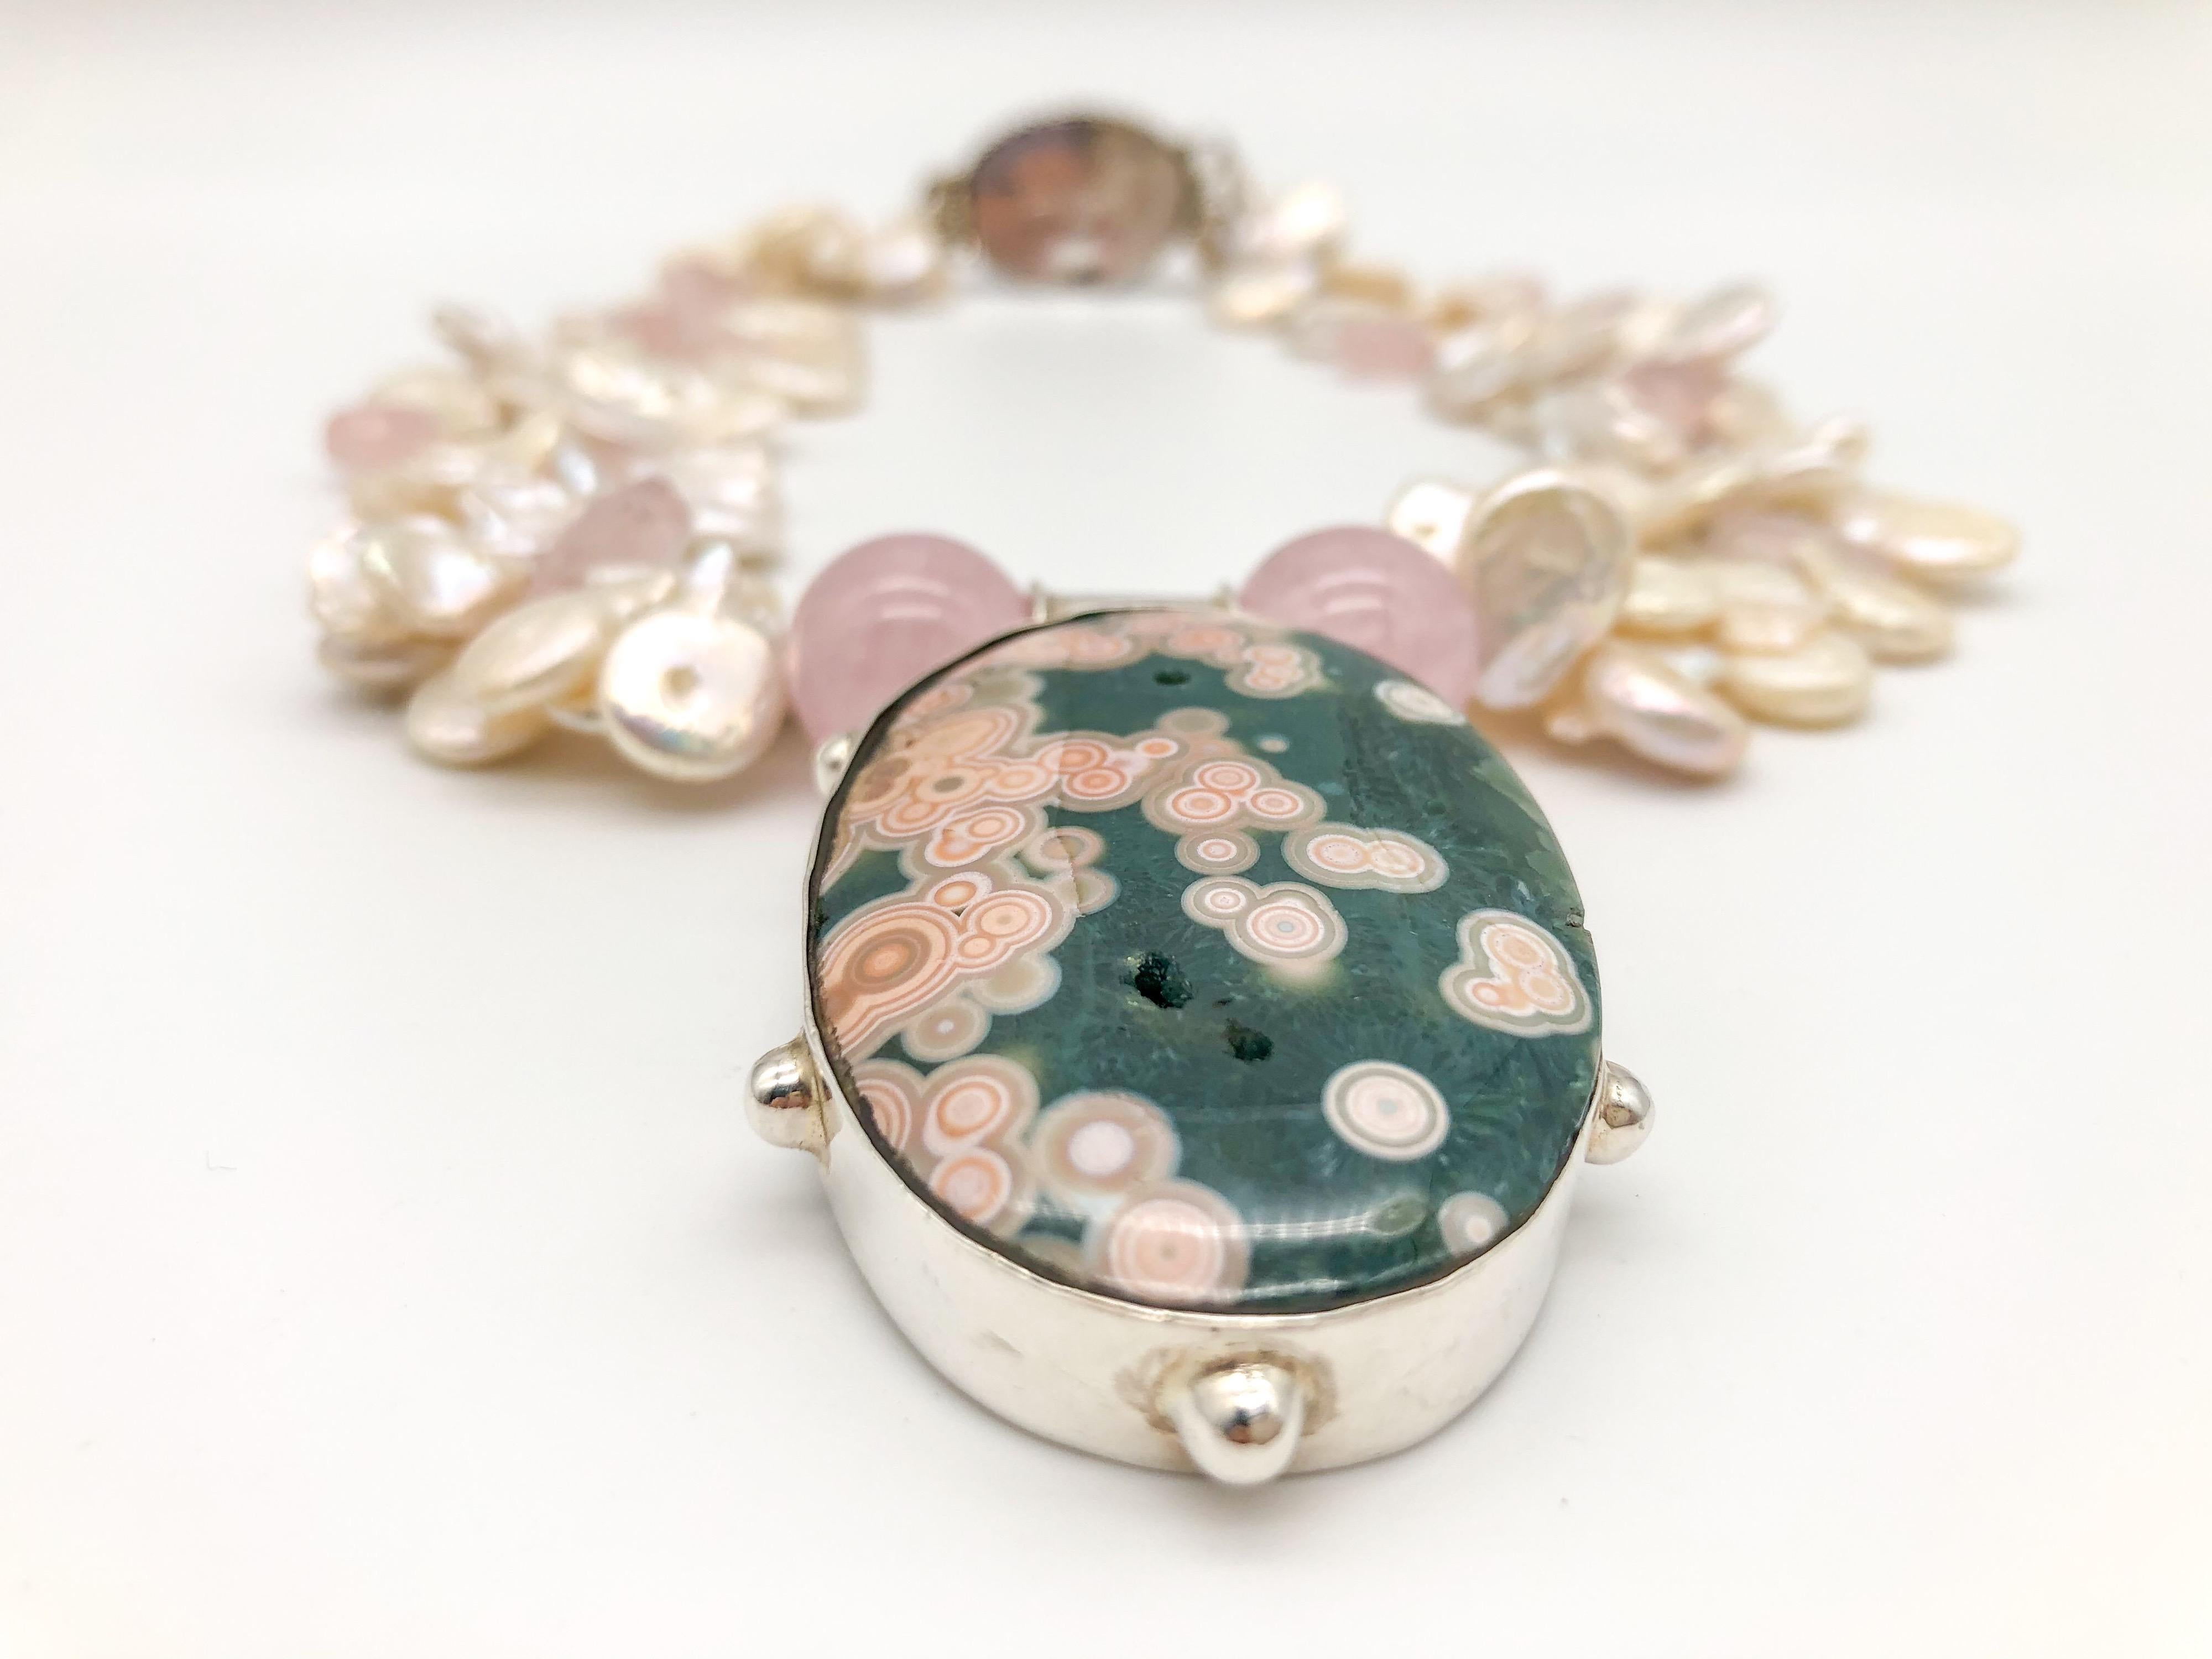 One-of-a-Kind
2 strand necklace
The polished rose quart softly compliments the pink clusters in the Jasper stone. The top-drilled petal pearls interspersed with rose Quartz faceted drops and to the overall elegance of the necklace. The clasp is